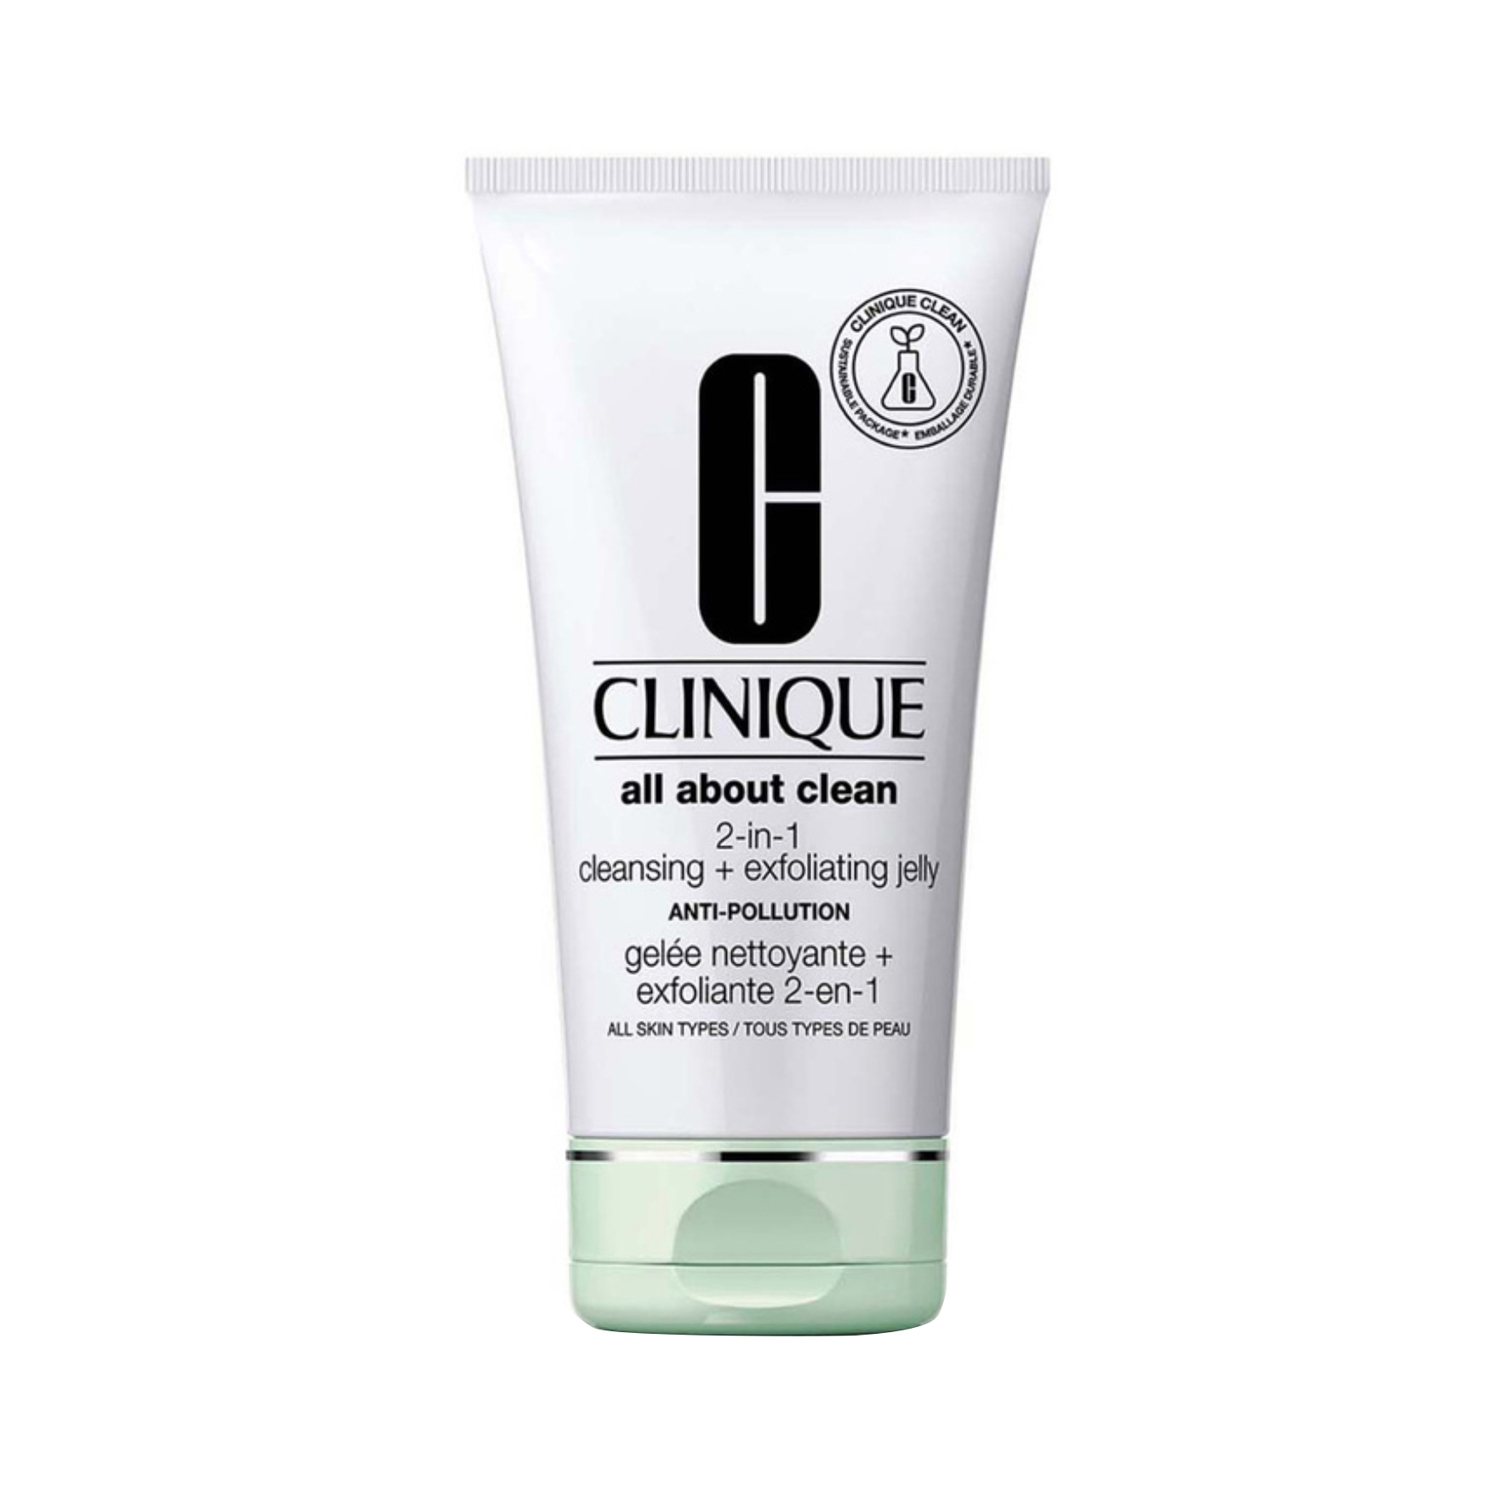 CLINIQUE | CLINIQUE All About Clean Anti-Pollution 2-In-1 Cleansing + Exfoliating Jelly (150ml)